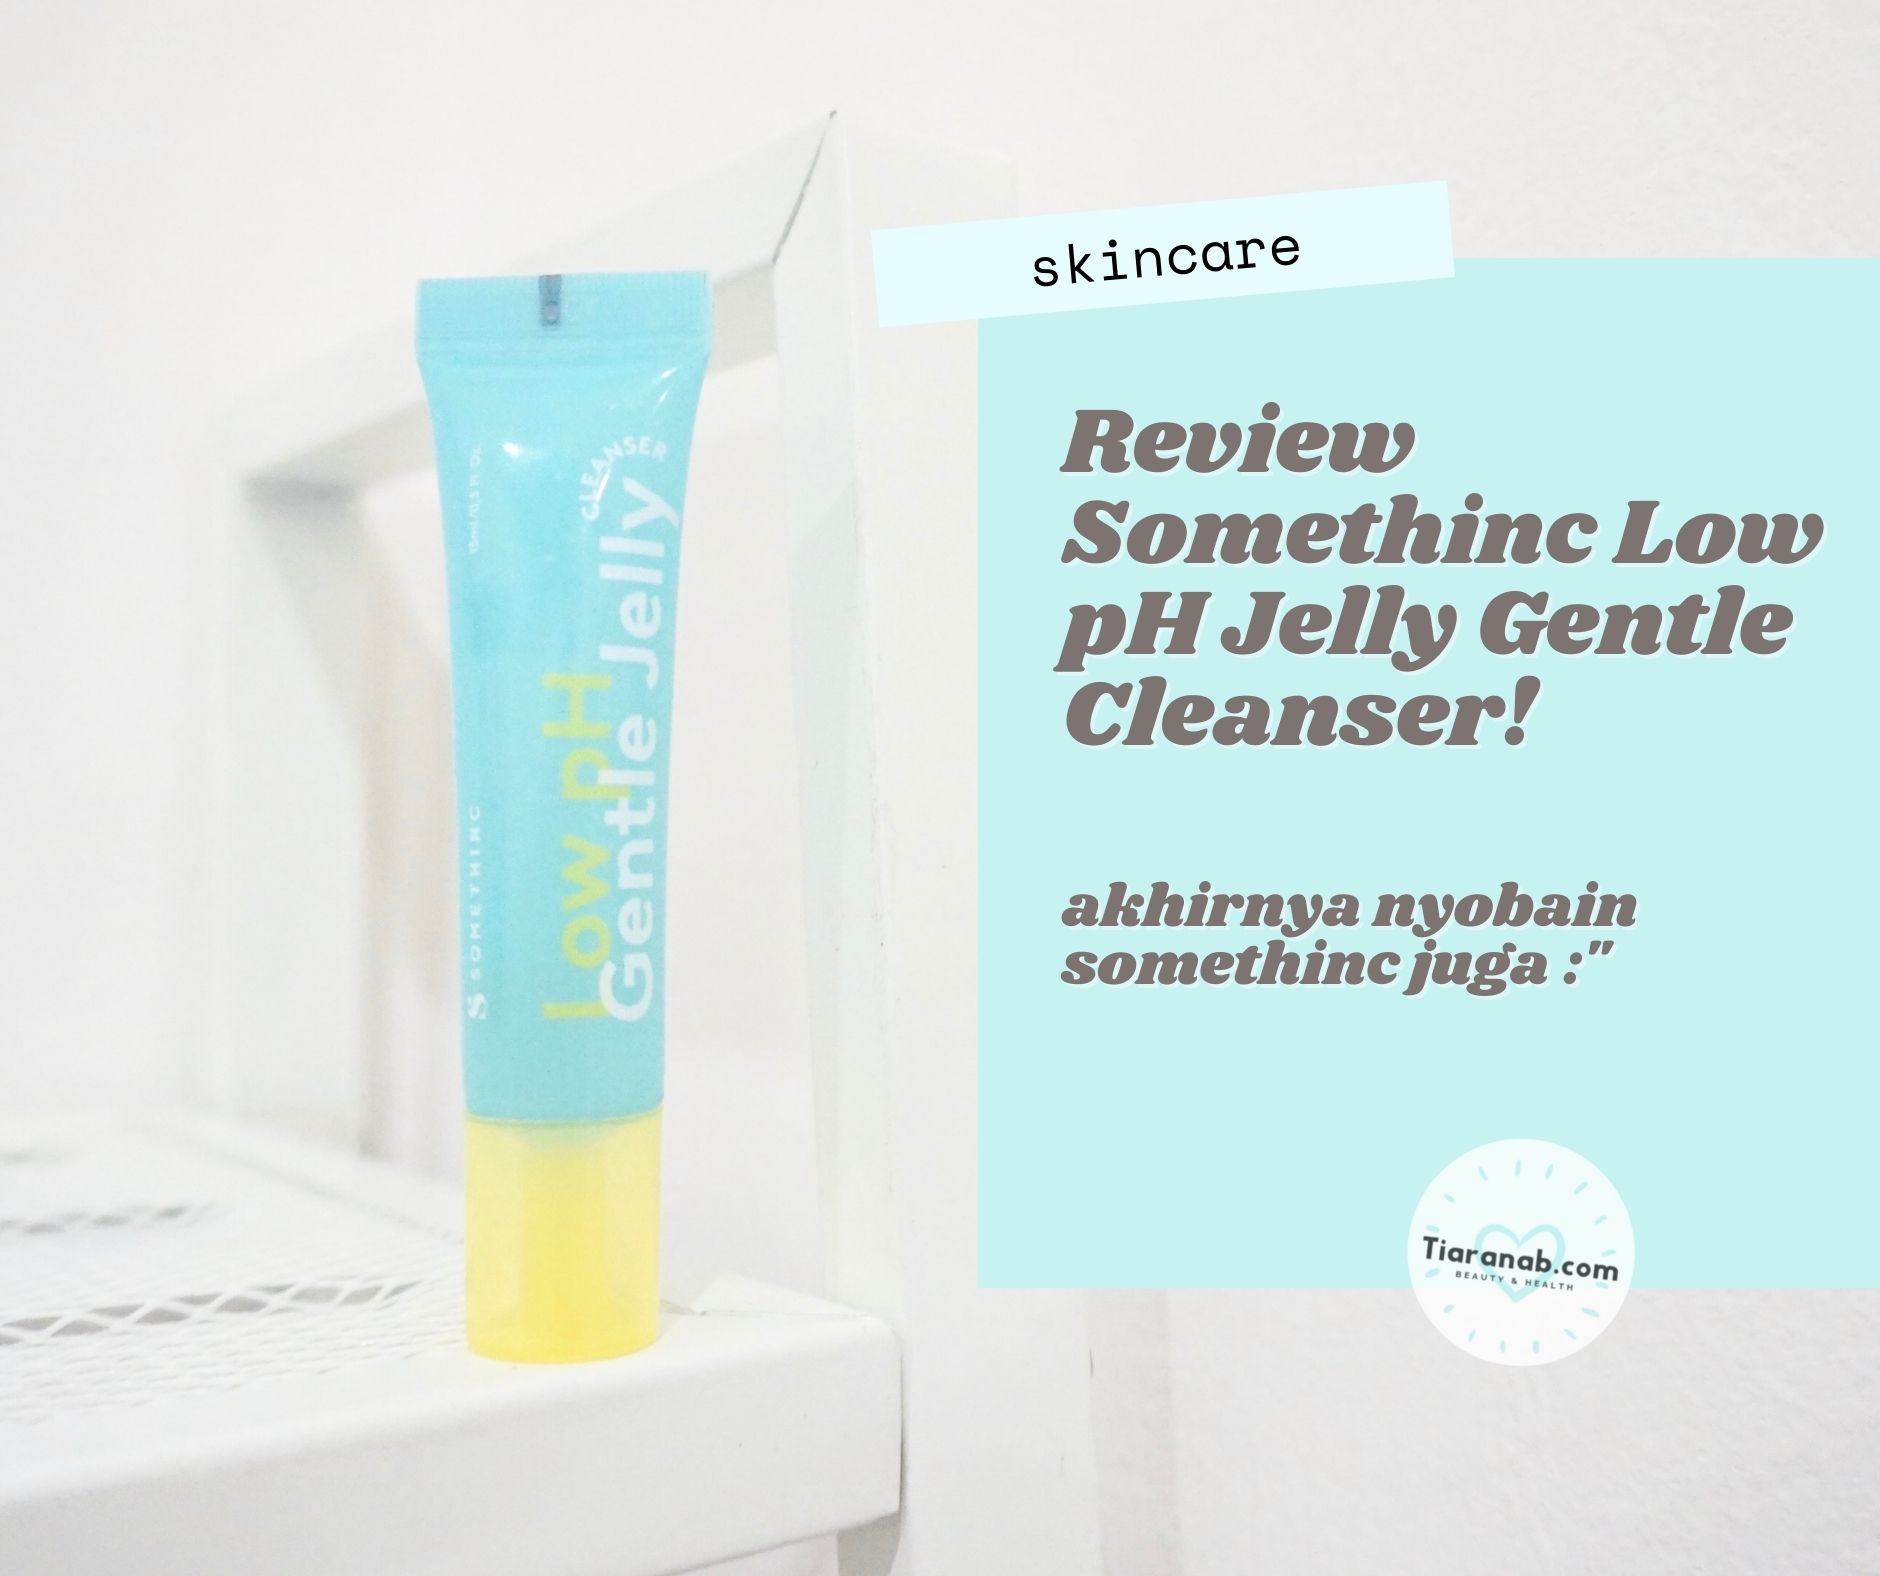 Cicaluronic Low PH Cleanser. Low PH таблетка. Mizon cicaluronic Low PH Cleanser. Mizon cicaluronic Low PH Cleansing Foam. Gentle jelly купить